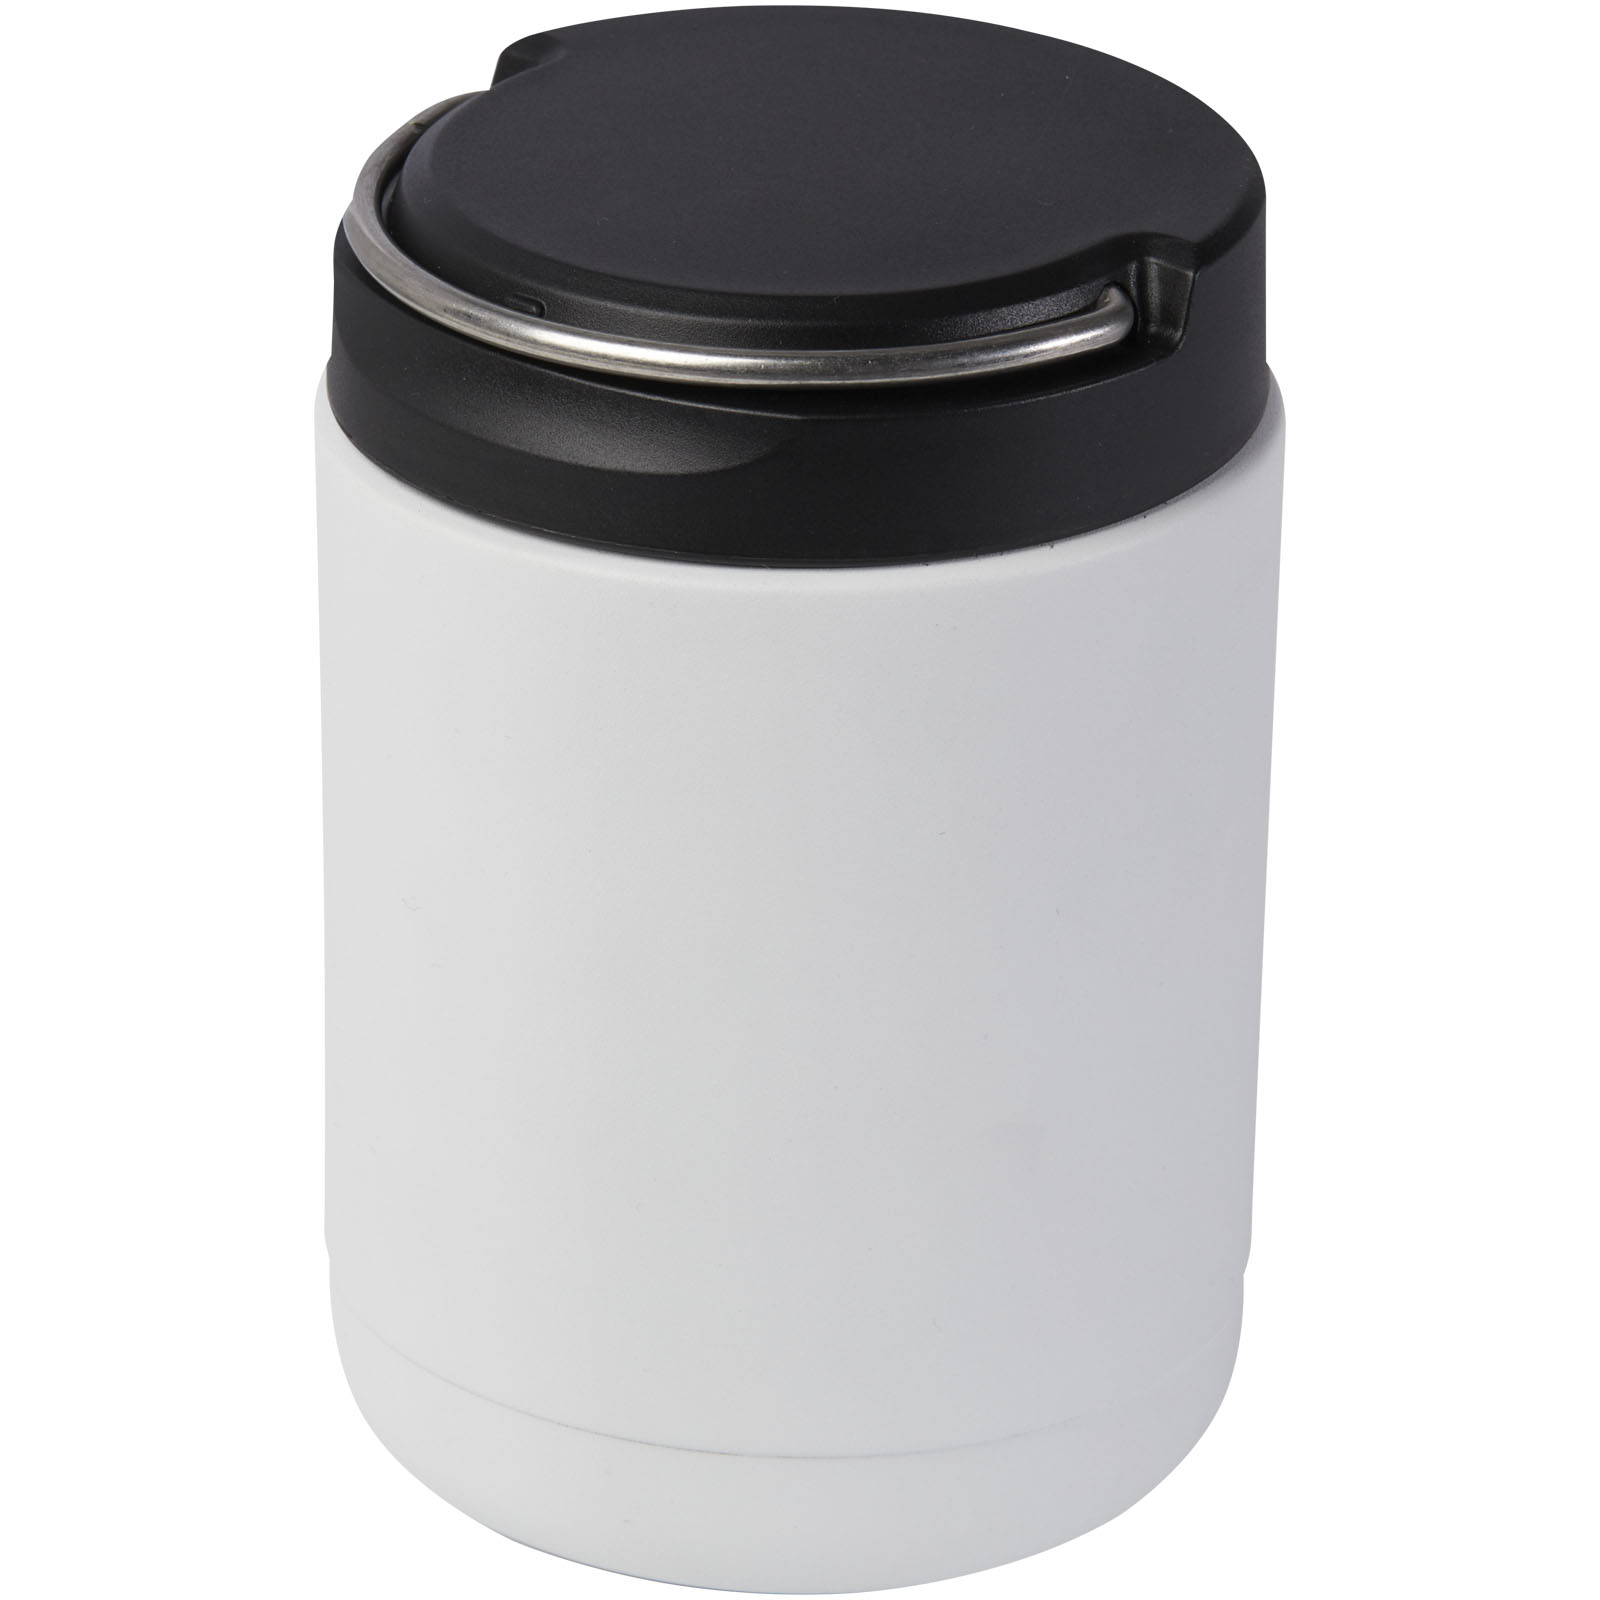 Advertising Lunch Boxes - Doveron 500 ml recycled stainless steel insulated lunch pot